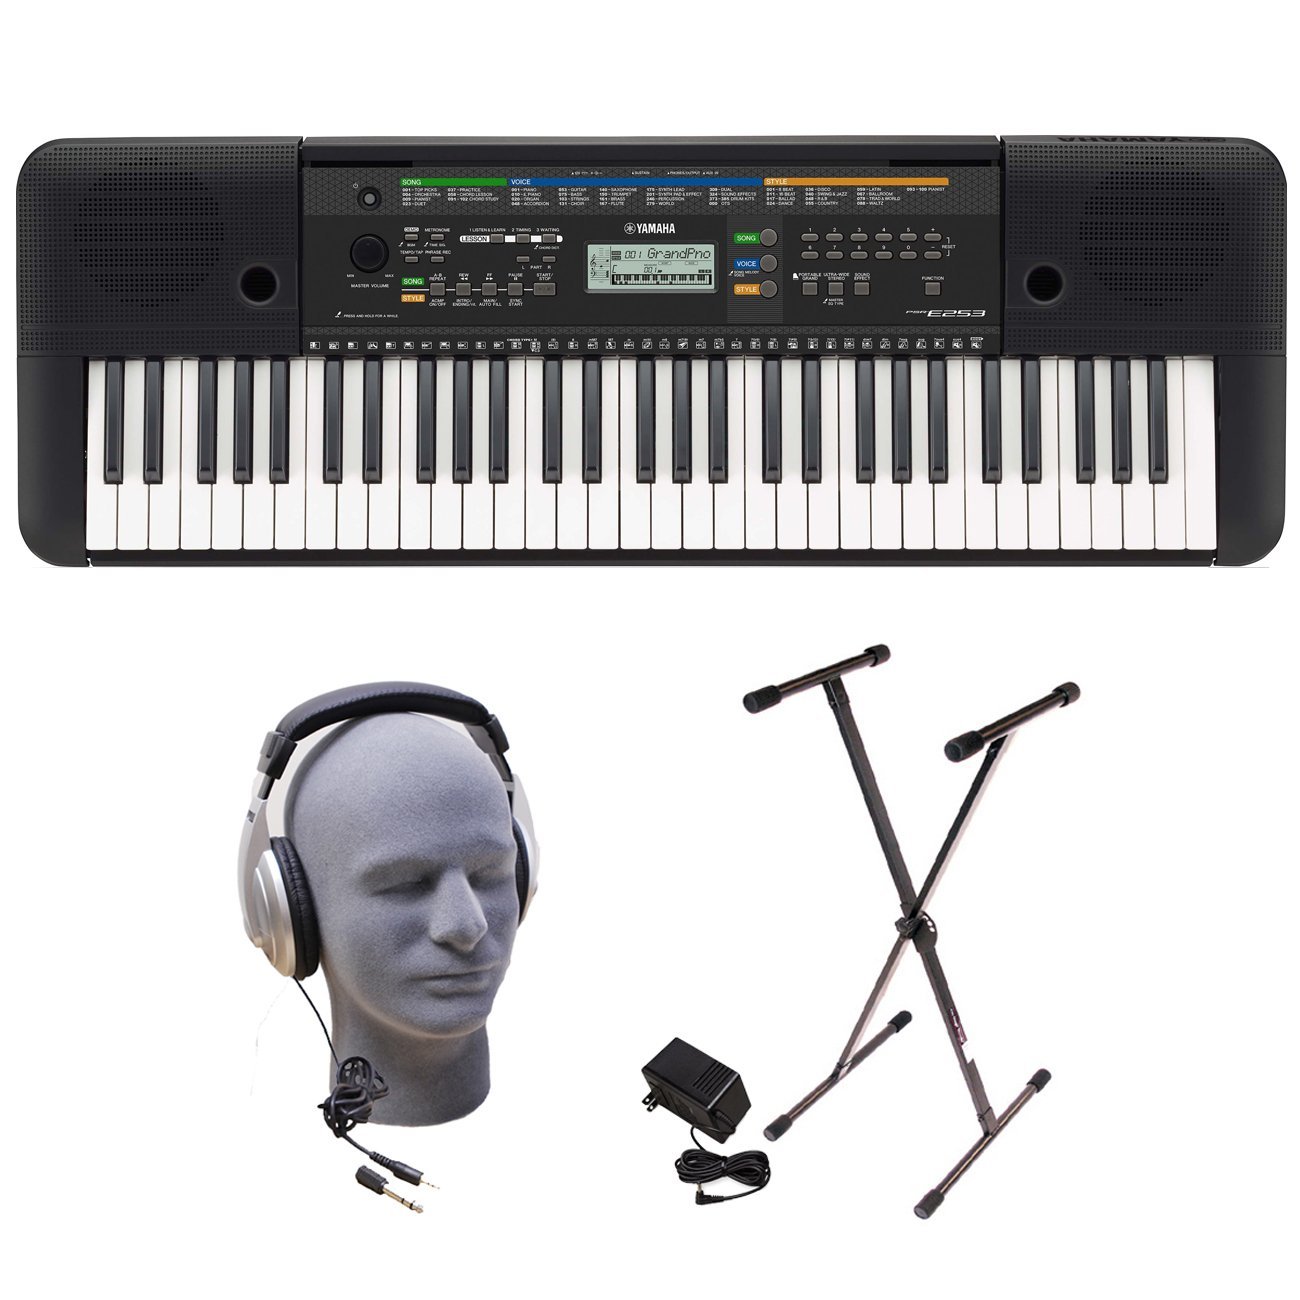 Yamaha PSRE253 Portable Keyboard with Headphones, Power Supply, and X-Style Stand